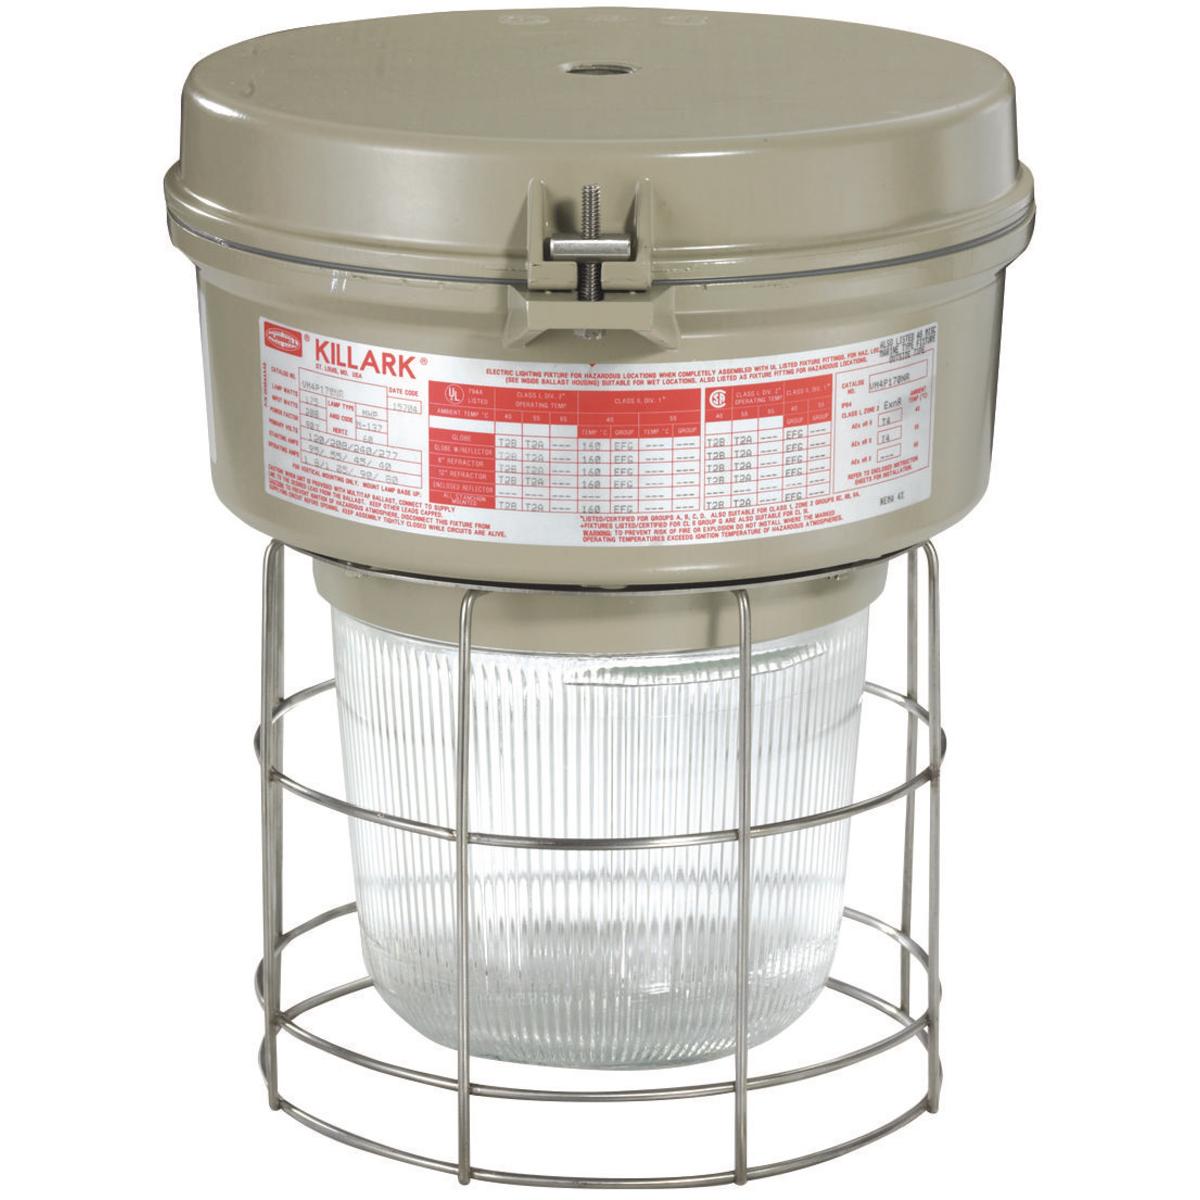 Hubbell VM4S155A2R1G VM4 Series - 150W High Pressure Sodium 480V - 3/4" Pendant - Type I Glass Refractor and Guard  ; Ballast tank and splice box – corrosion resistant copper-free aluminum alloy with baked powder epoxy/polyester finish, electrostatically applied for complete,